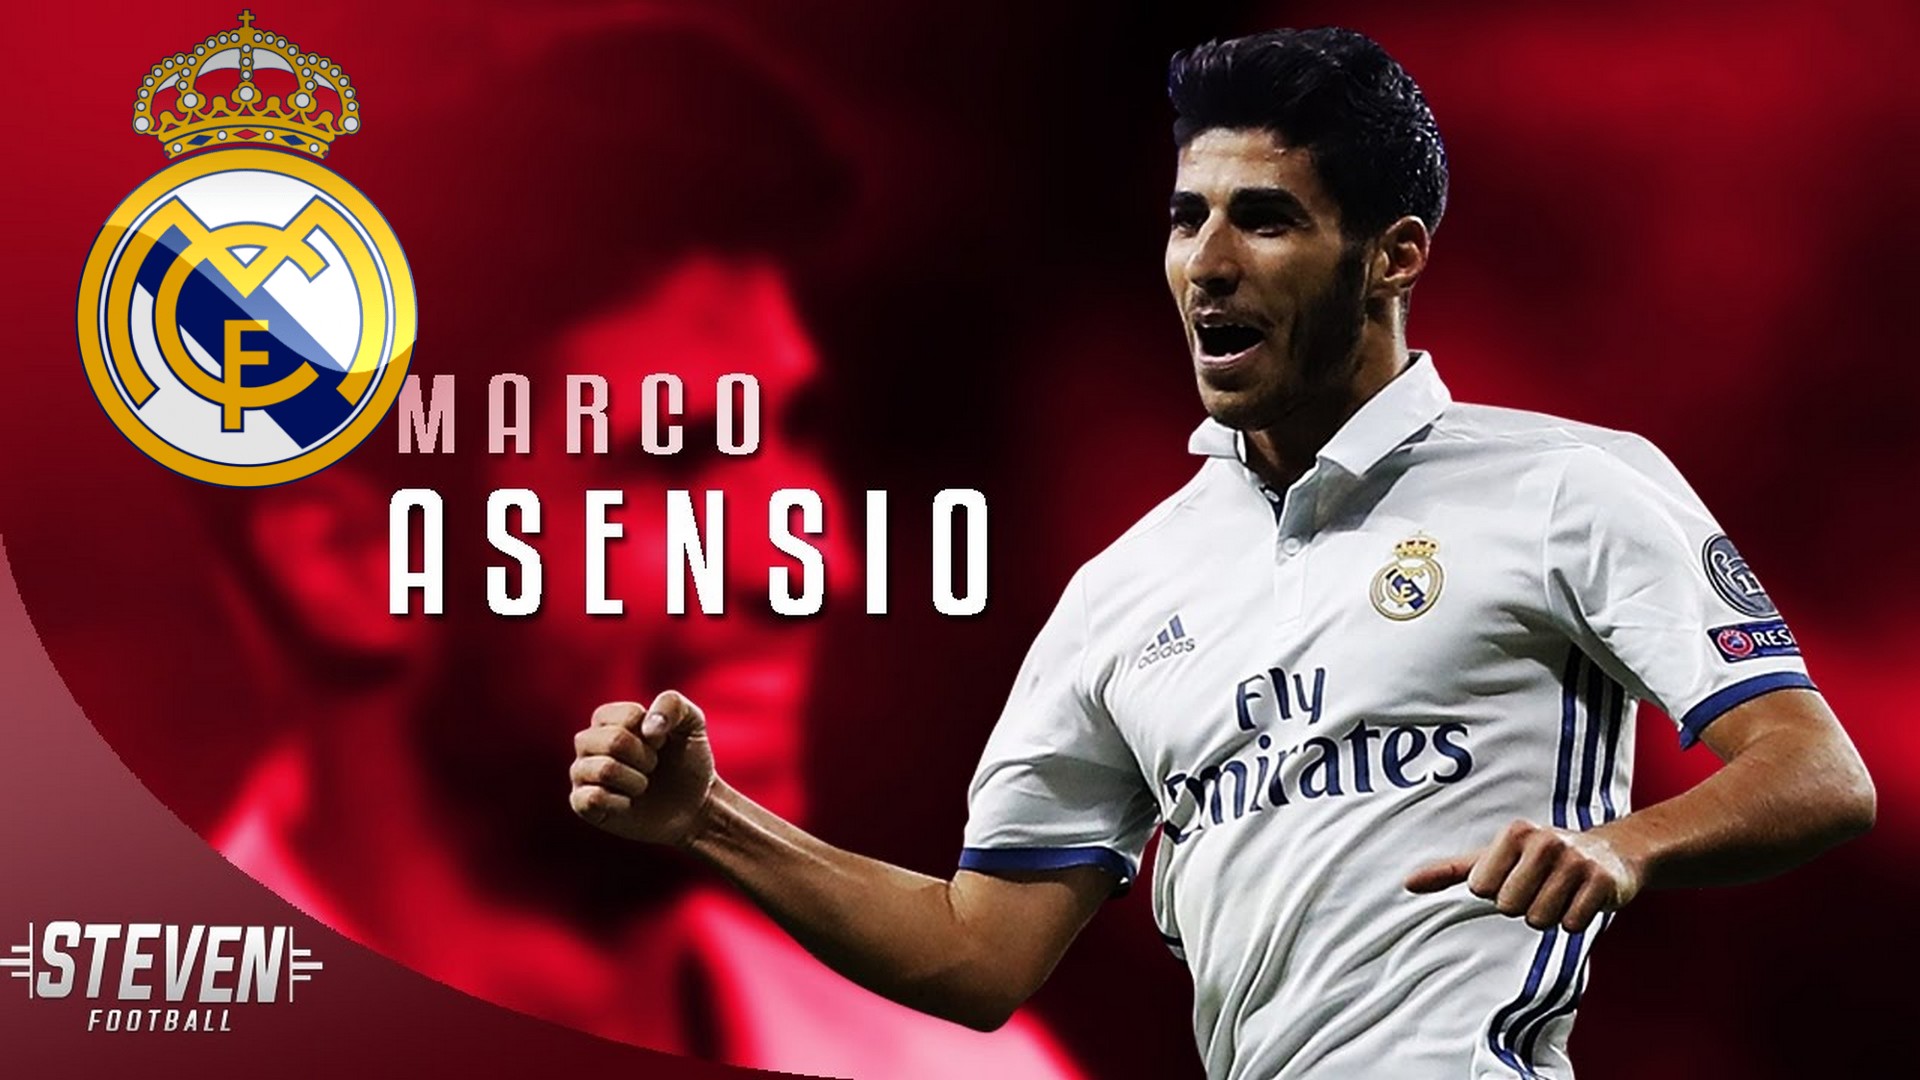 Marco Asensio Real Madrid HD Wallpapers with resolution 1920x1080 pixel. You can make this wallpaper for your Mac or Windows Desktop Background, iPhone, Android or Tablet and another Smartphone device